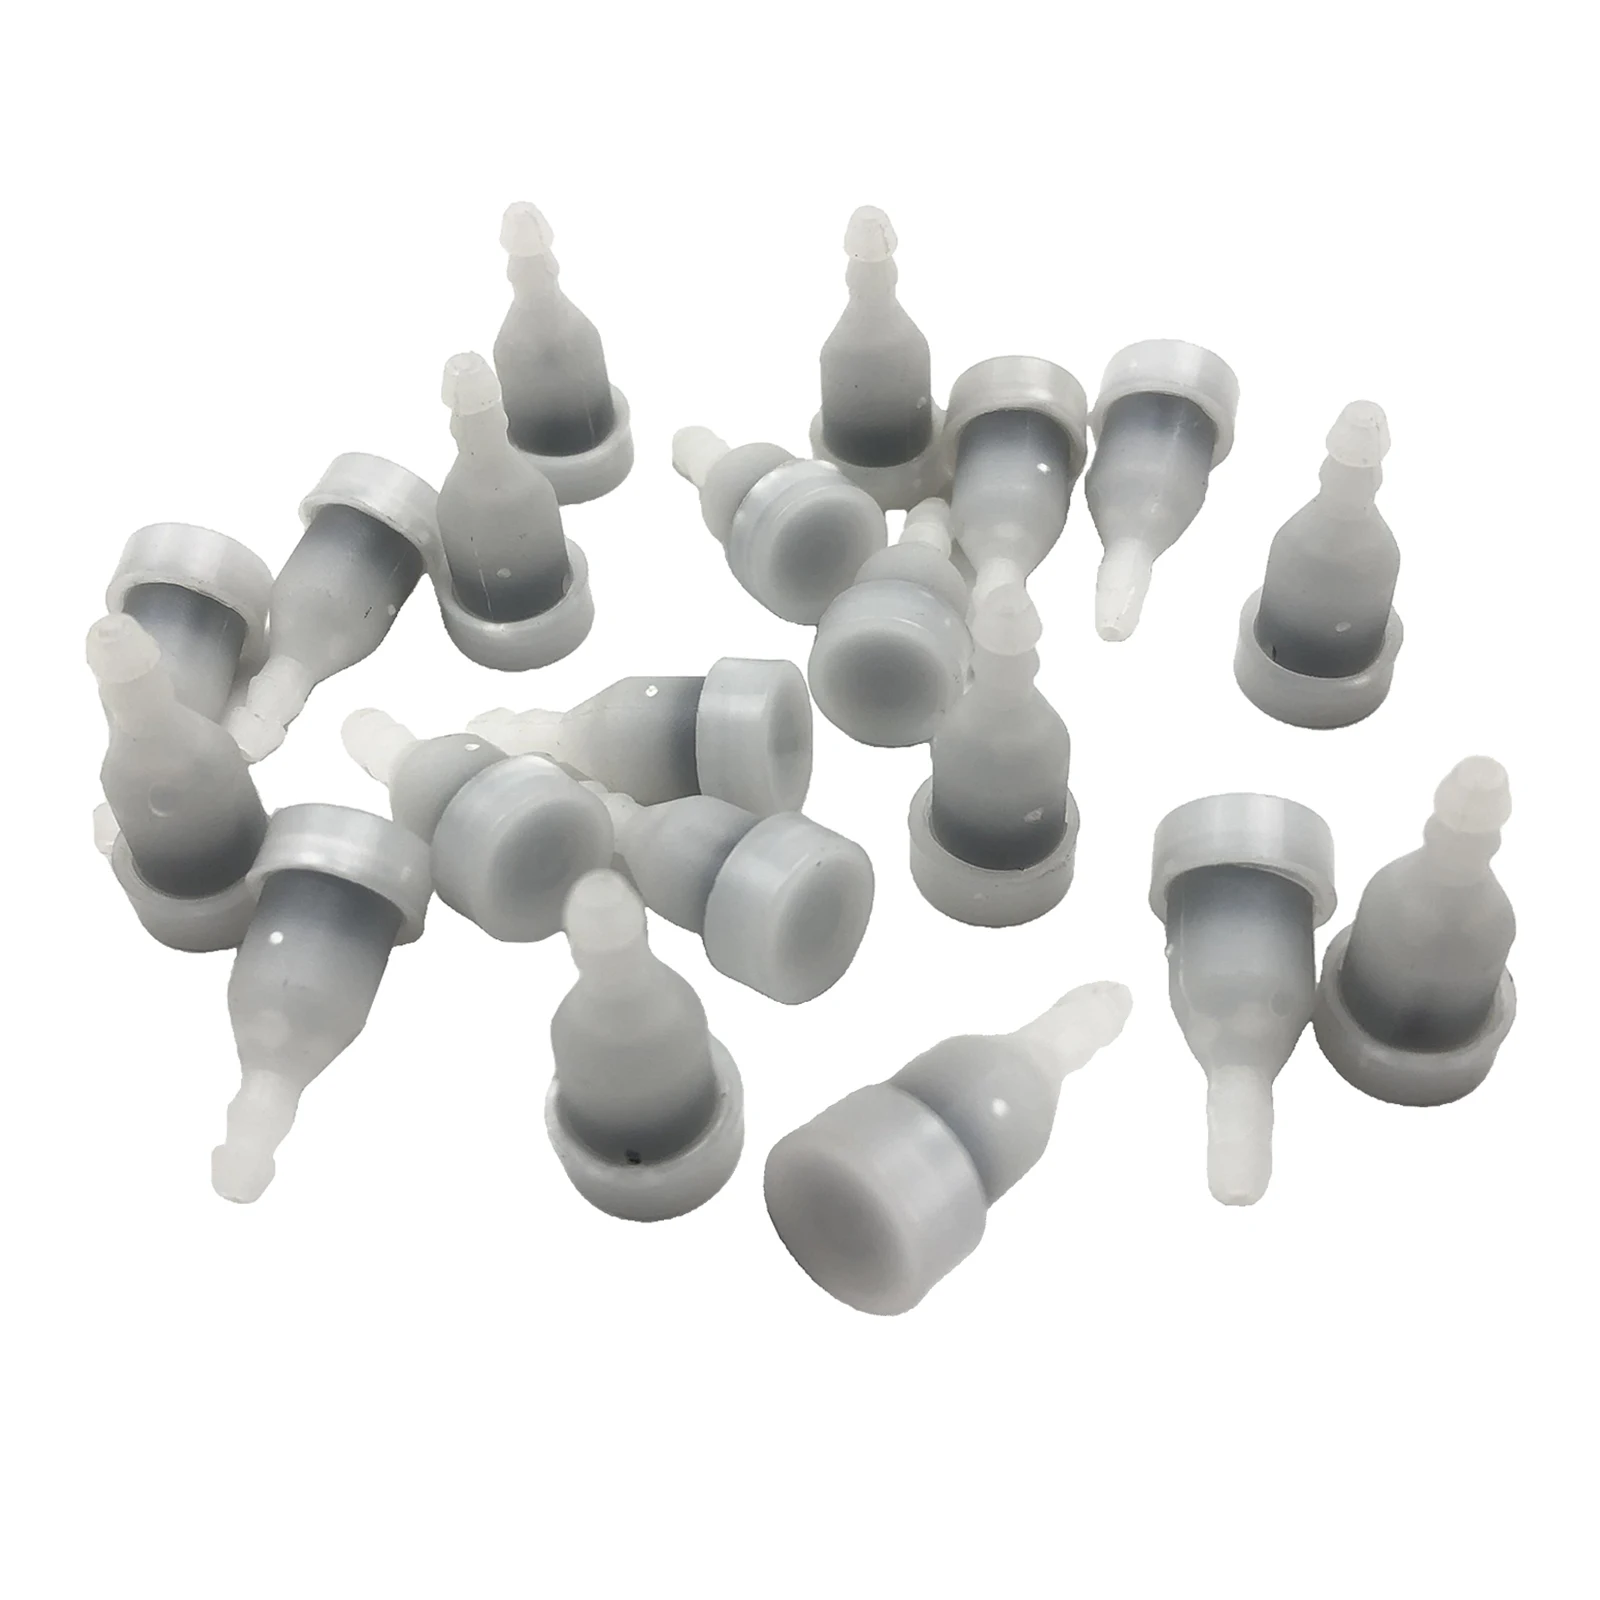 20pcs Fuel Tank Vent for STIHL 021 023 025 MS210 MS230 MS250 Chainsaw Replace 1117 350 5800